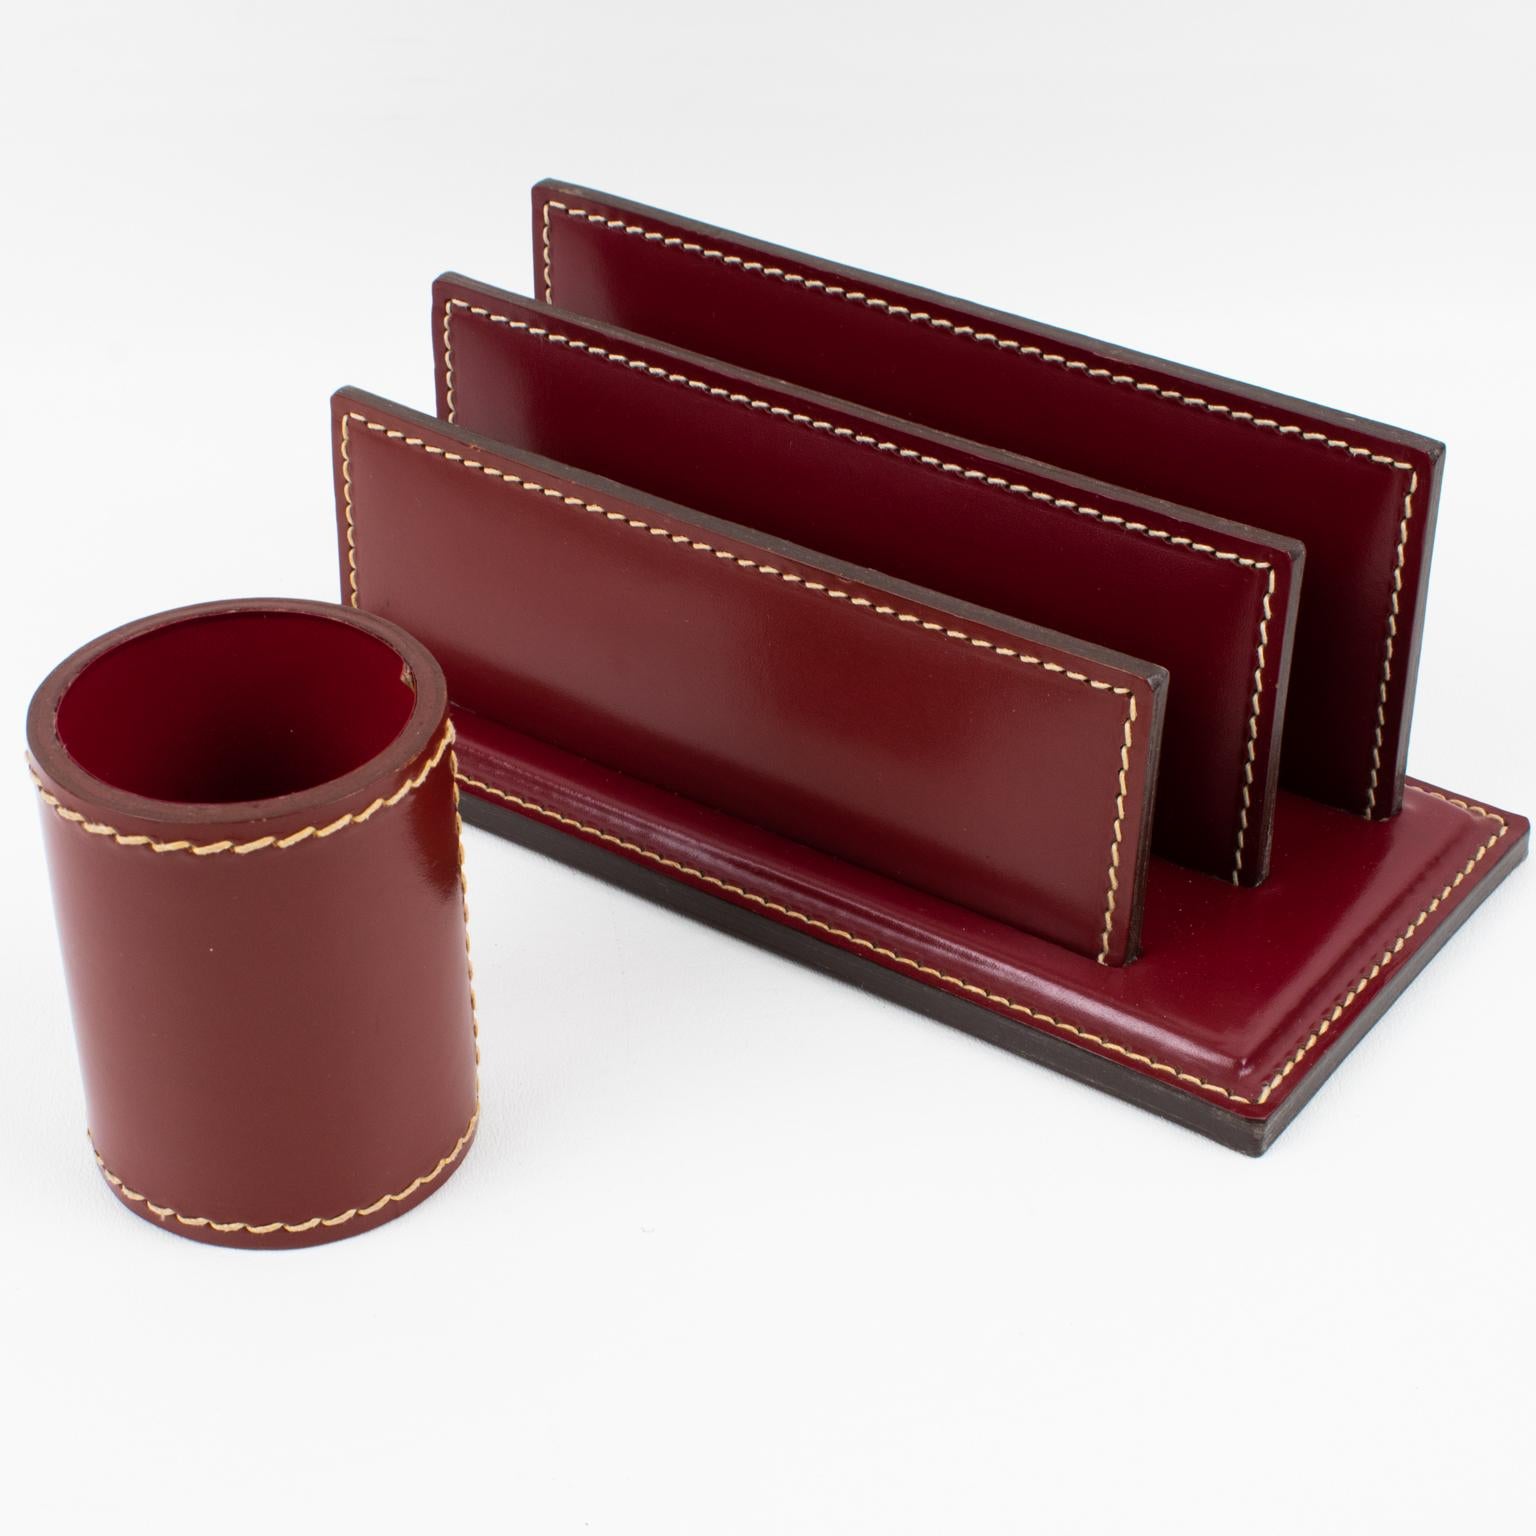 Art Deco Hand-Stitched Red Leather Desk Set Letter and Pen Holders In Excellent Condition For Sale In Atlanta, GA